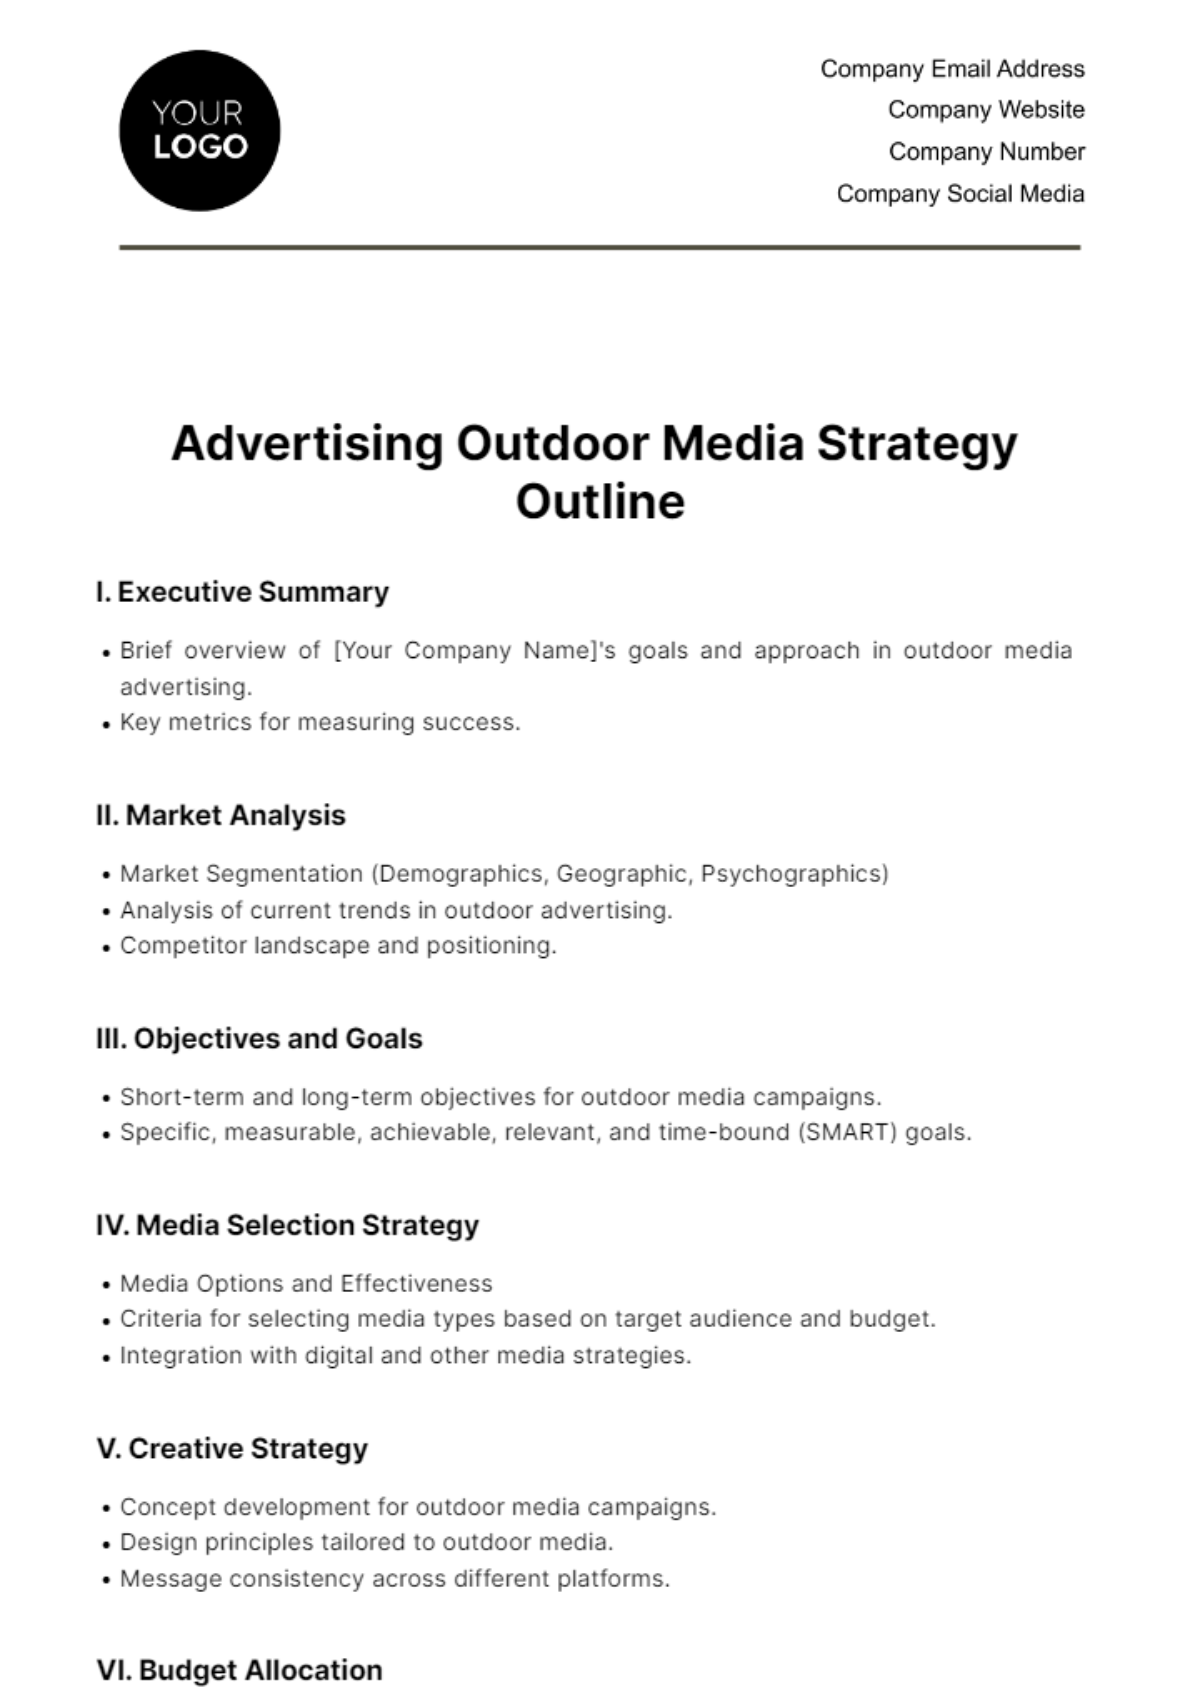 Free Advertising Outdoor Media Strategy Outline Template